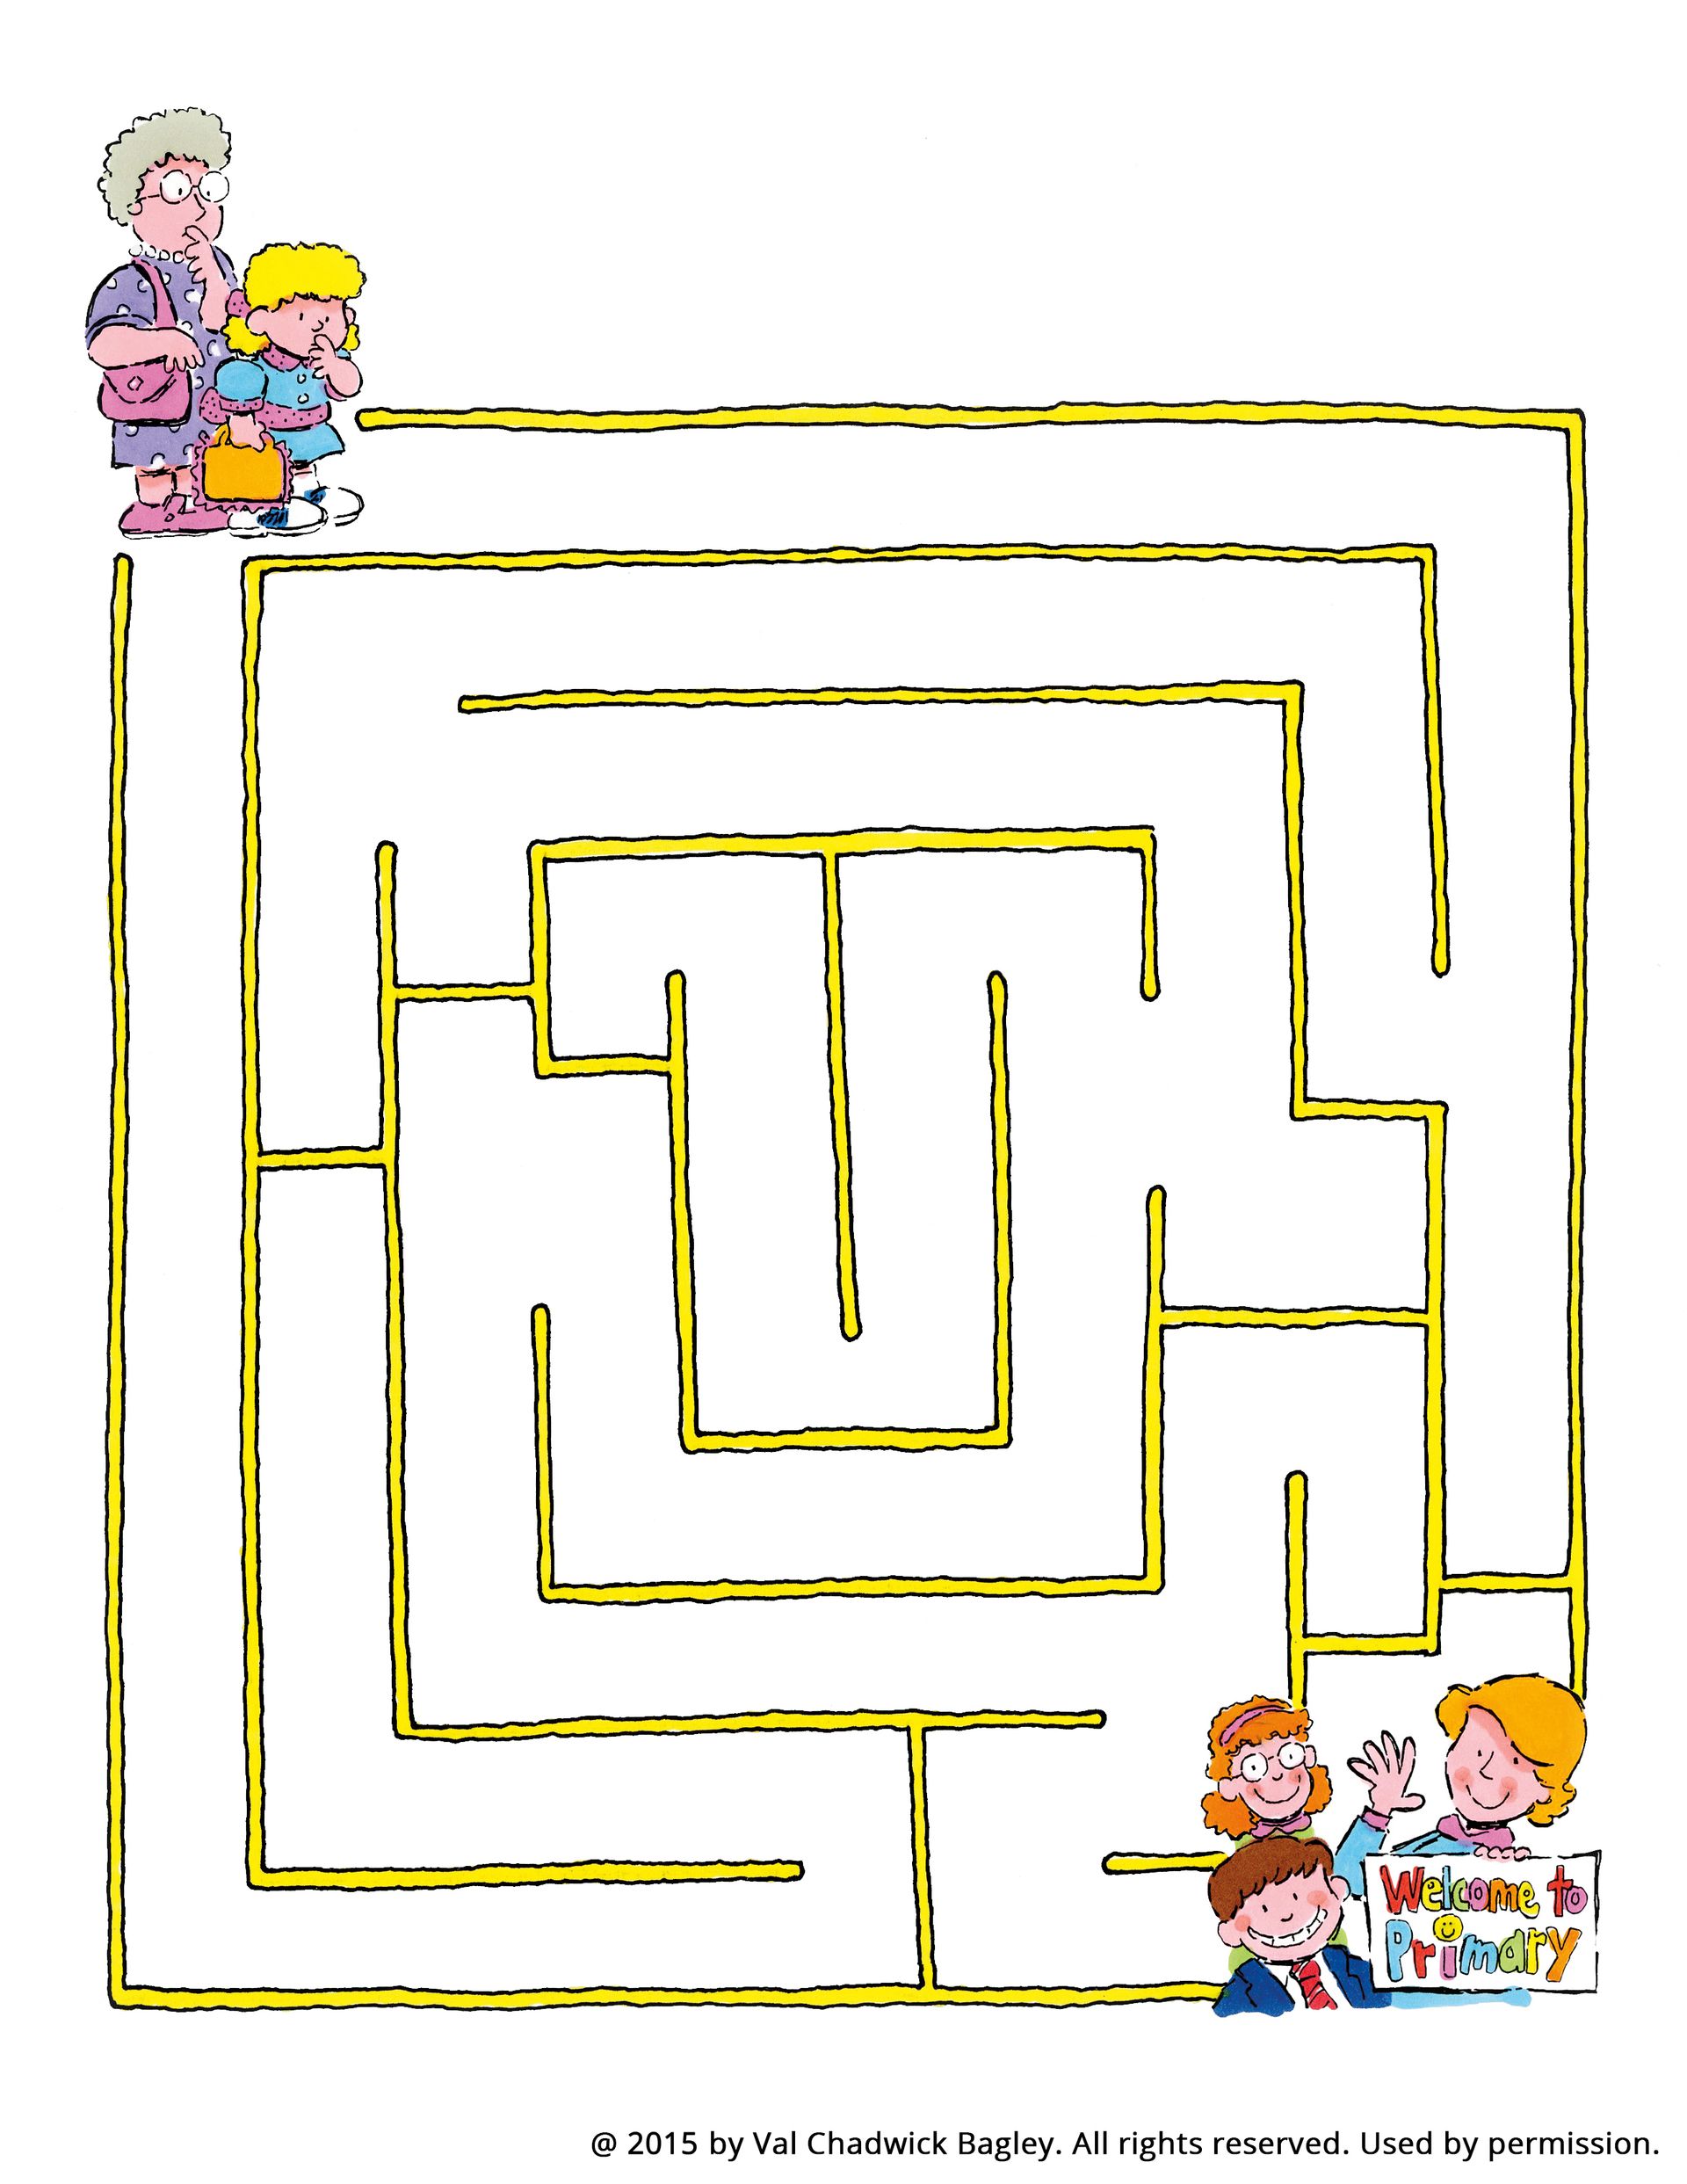 A maze to help children get a grandma and her granddaughter to Primary.